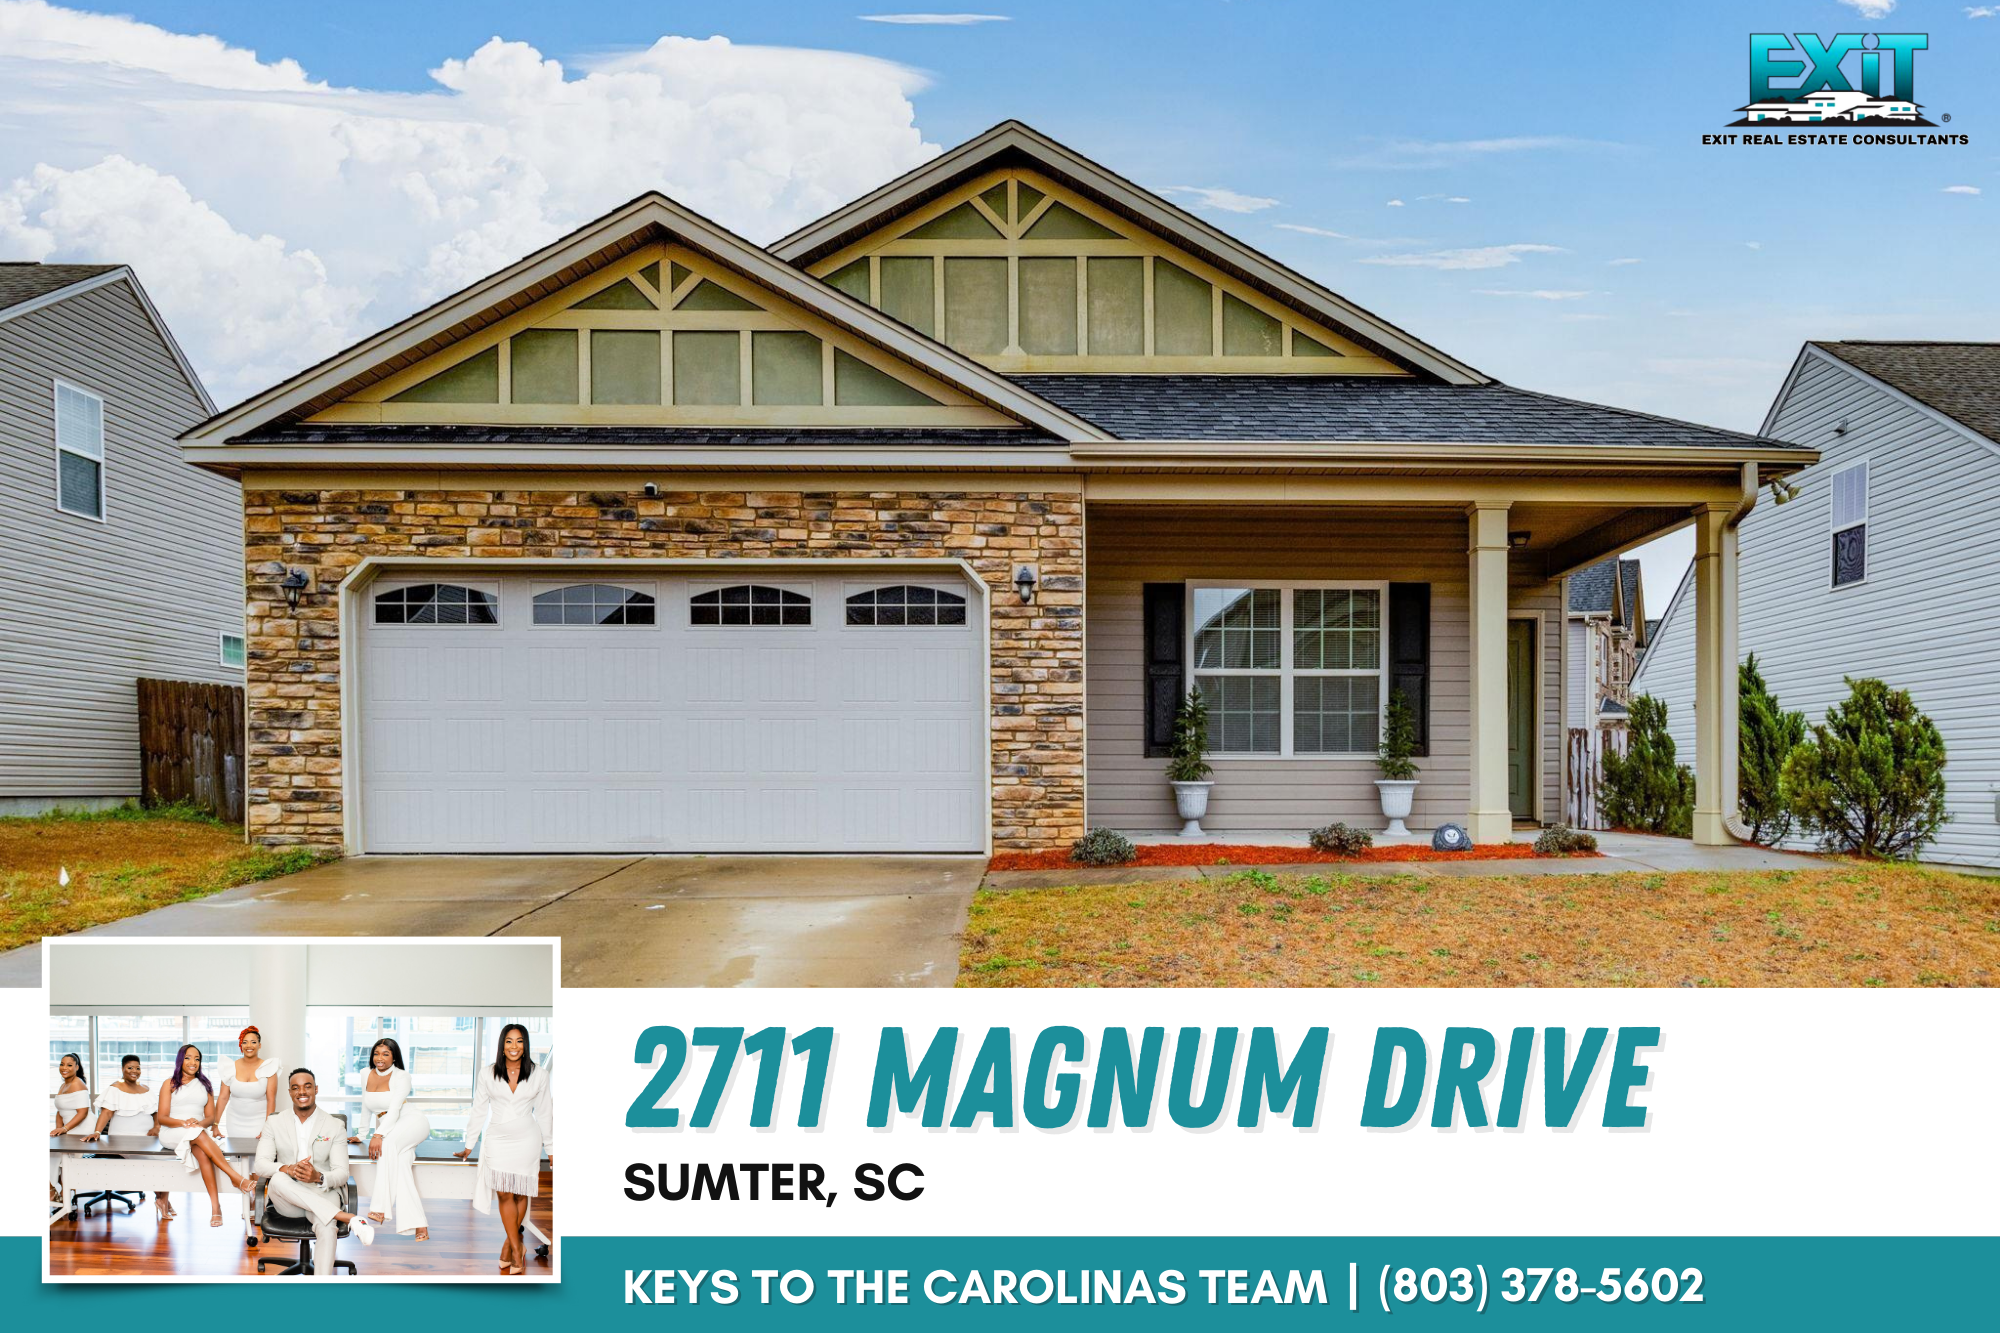 Just listed in Hunter's Crossing - Sumter